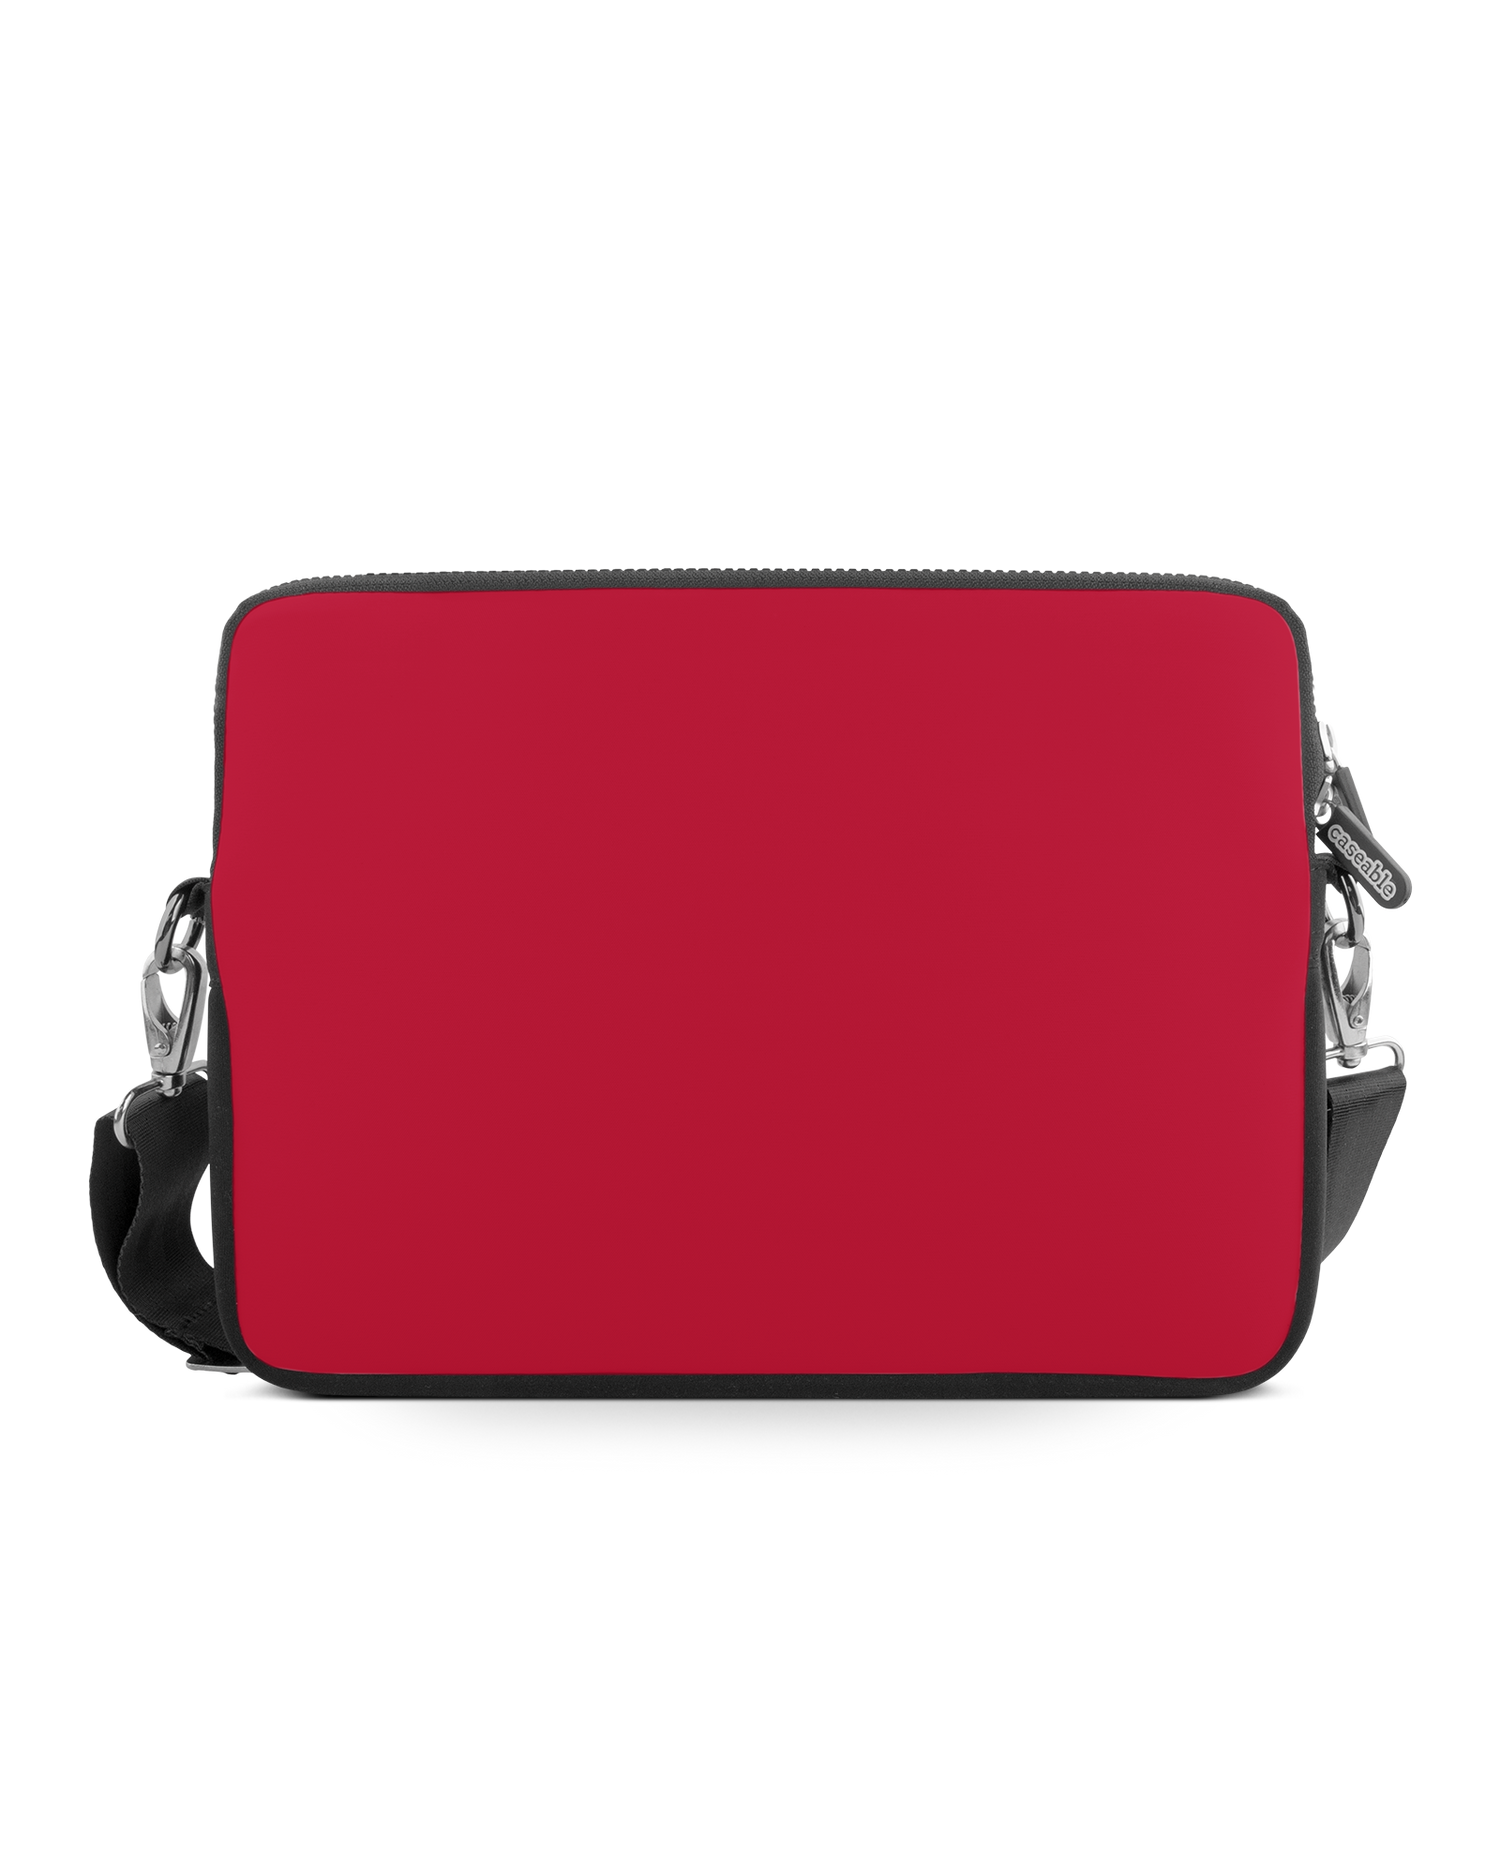 RED Premium Laptop Bag 15 inch: Front View